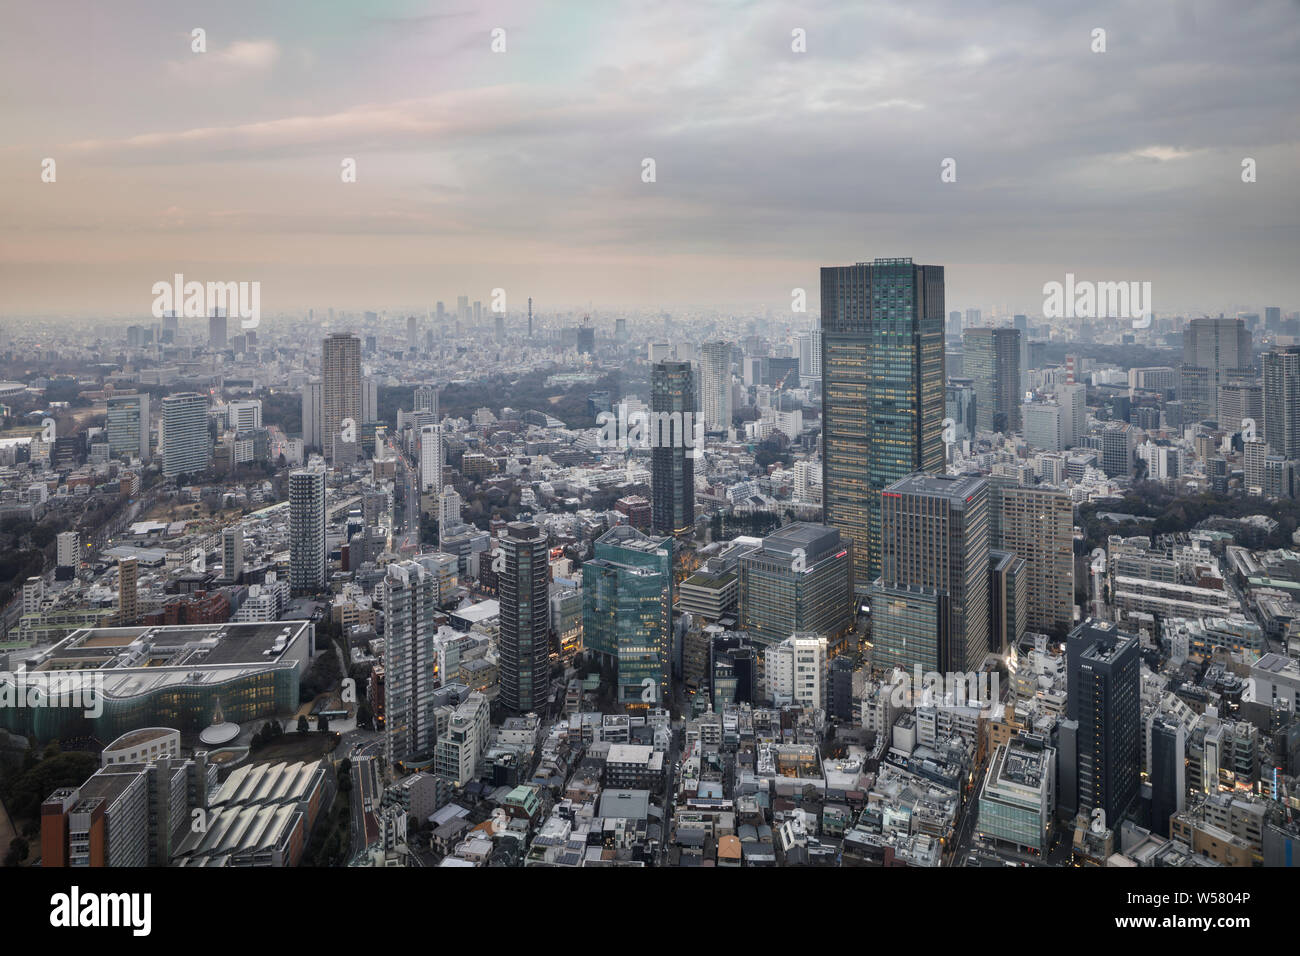 The Tokyo skyline with the high rise buildings of Shibuya in the distance. Stock Photo